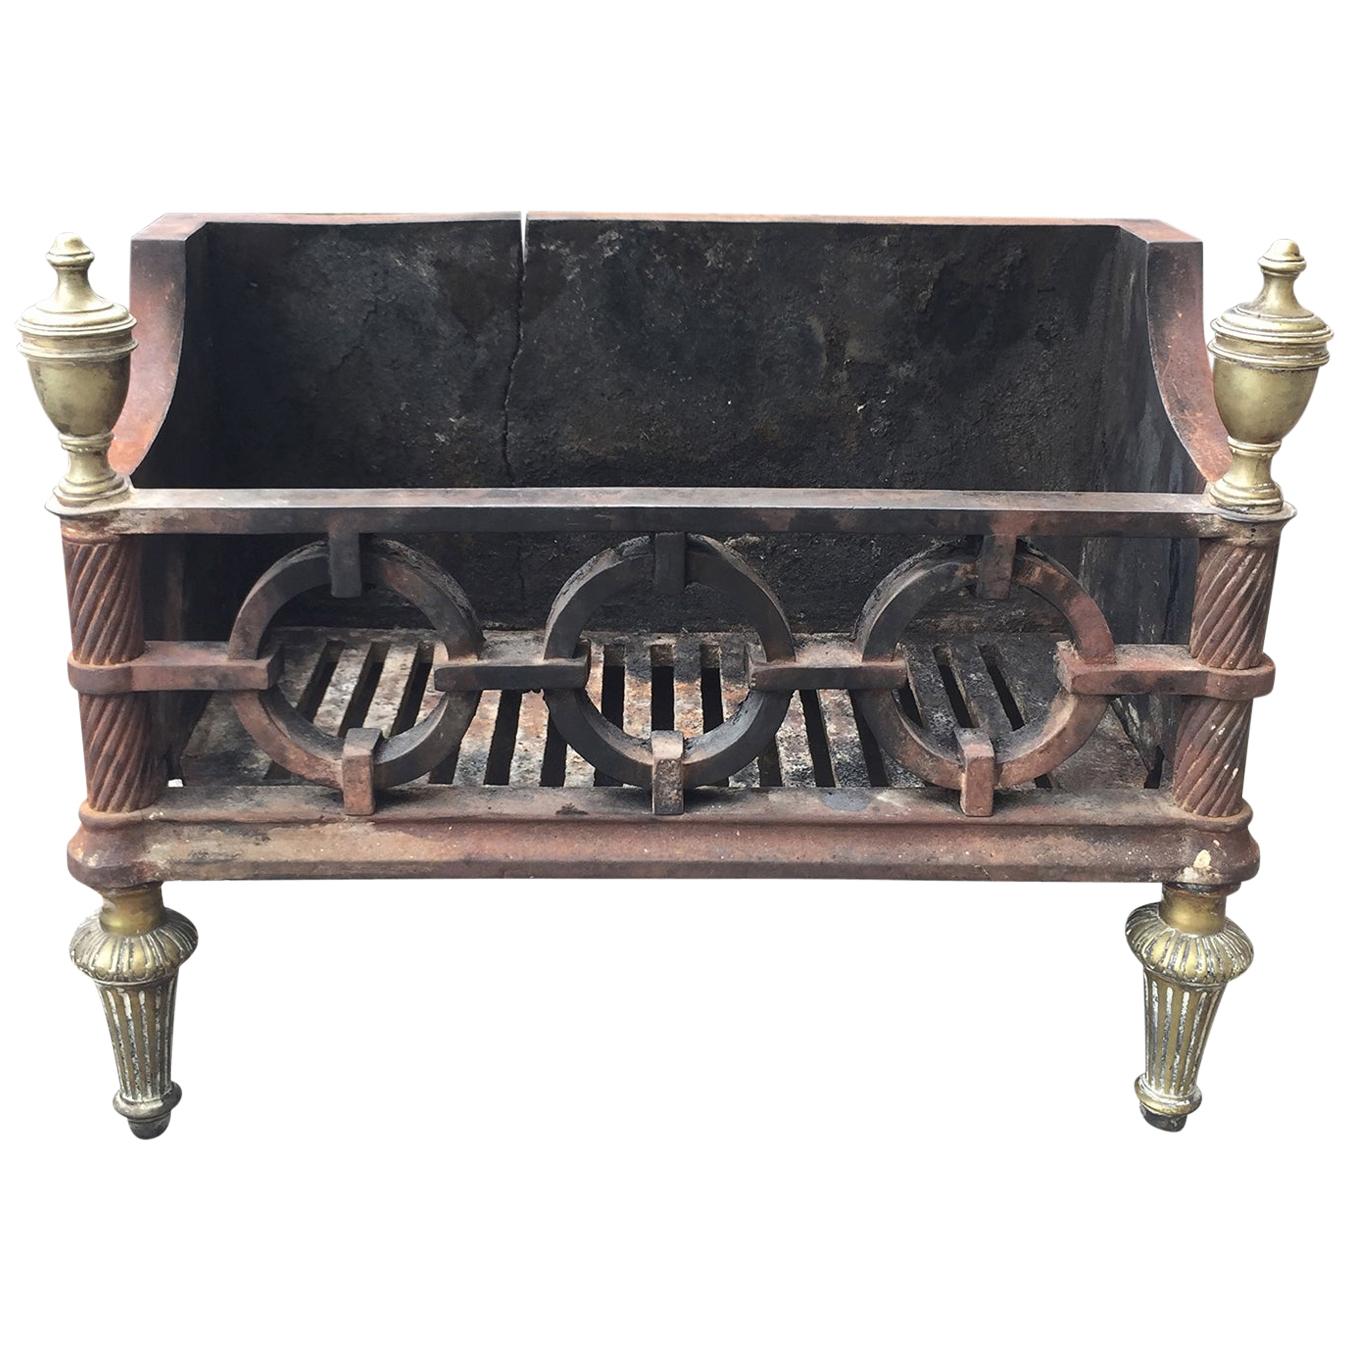 19th-20th Century George III Style Cast Iron and Brass Fire Grate